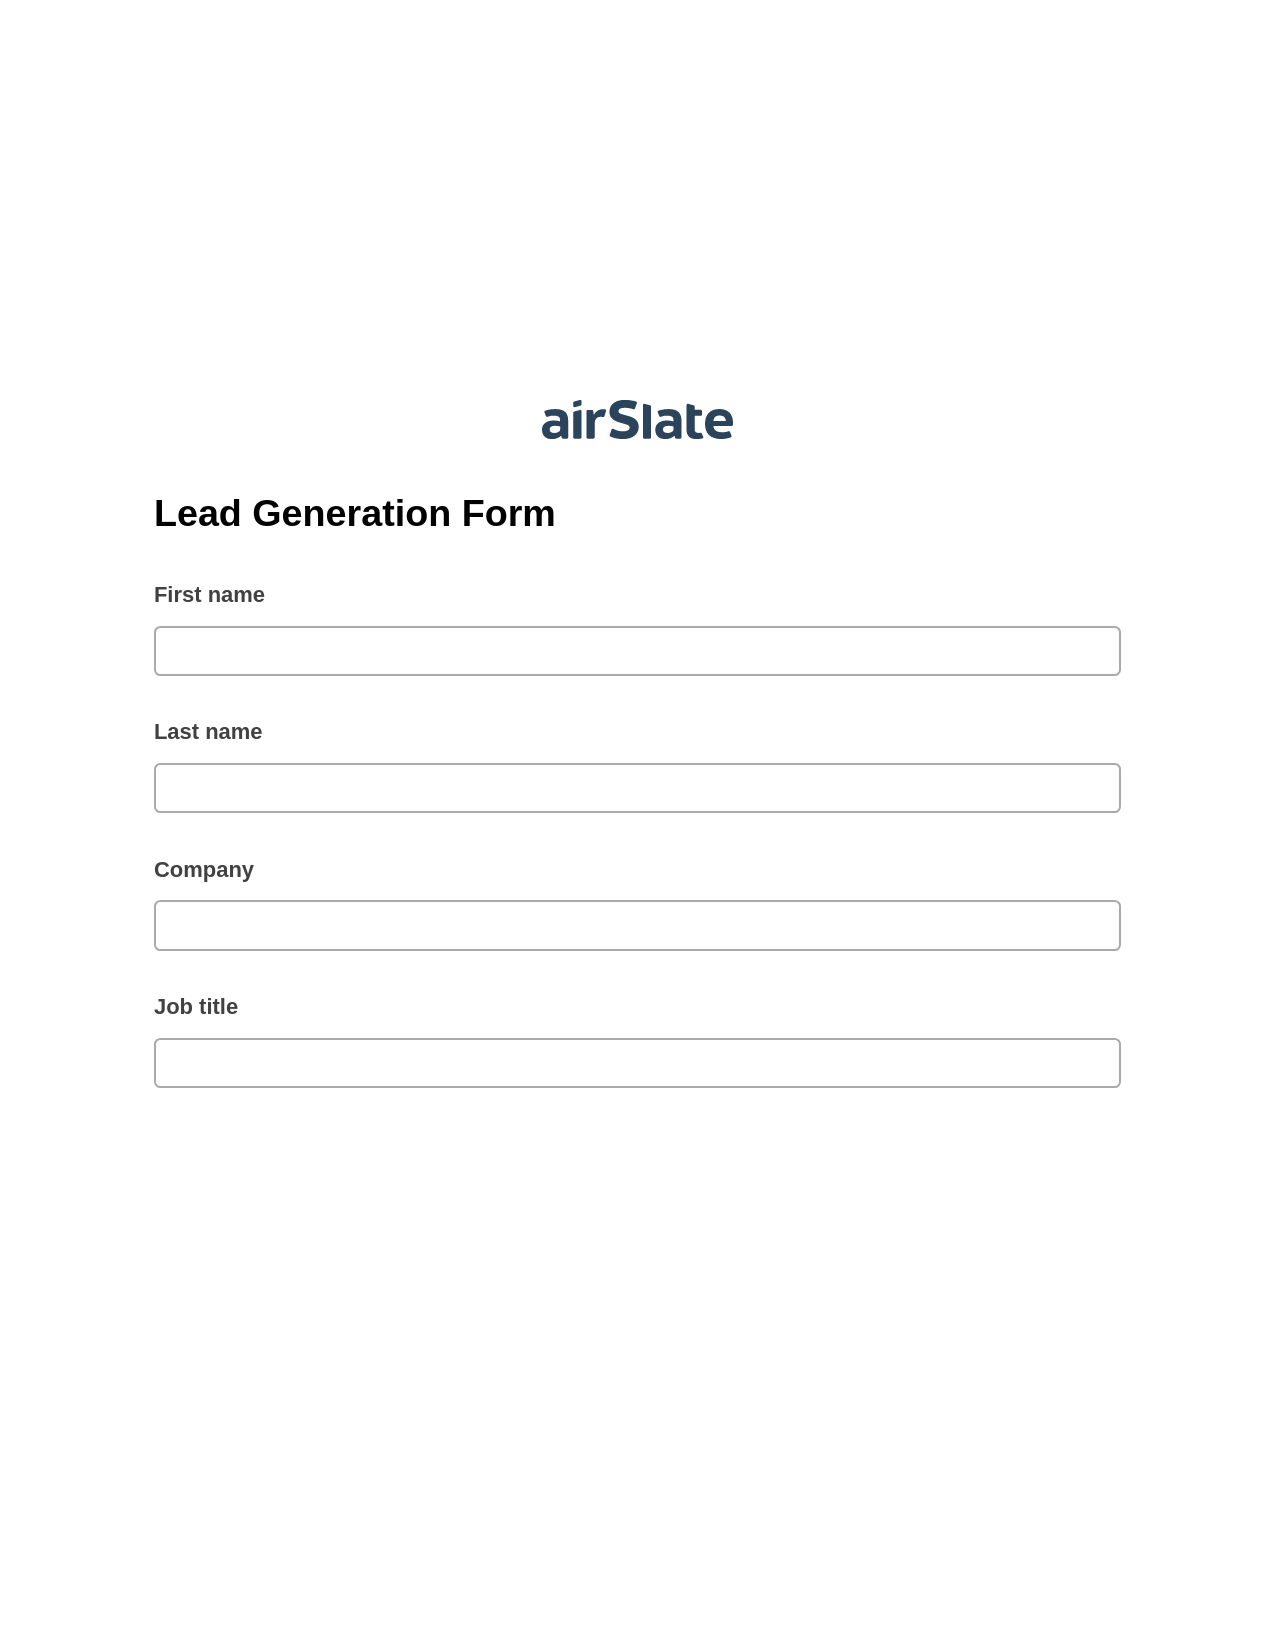 Lead Generation Form Pre-fill from MS Dynamics 365 Records, Send a Slate to Salesforce Contact Bot, Archive to OneDrive Bot